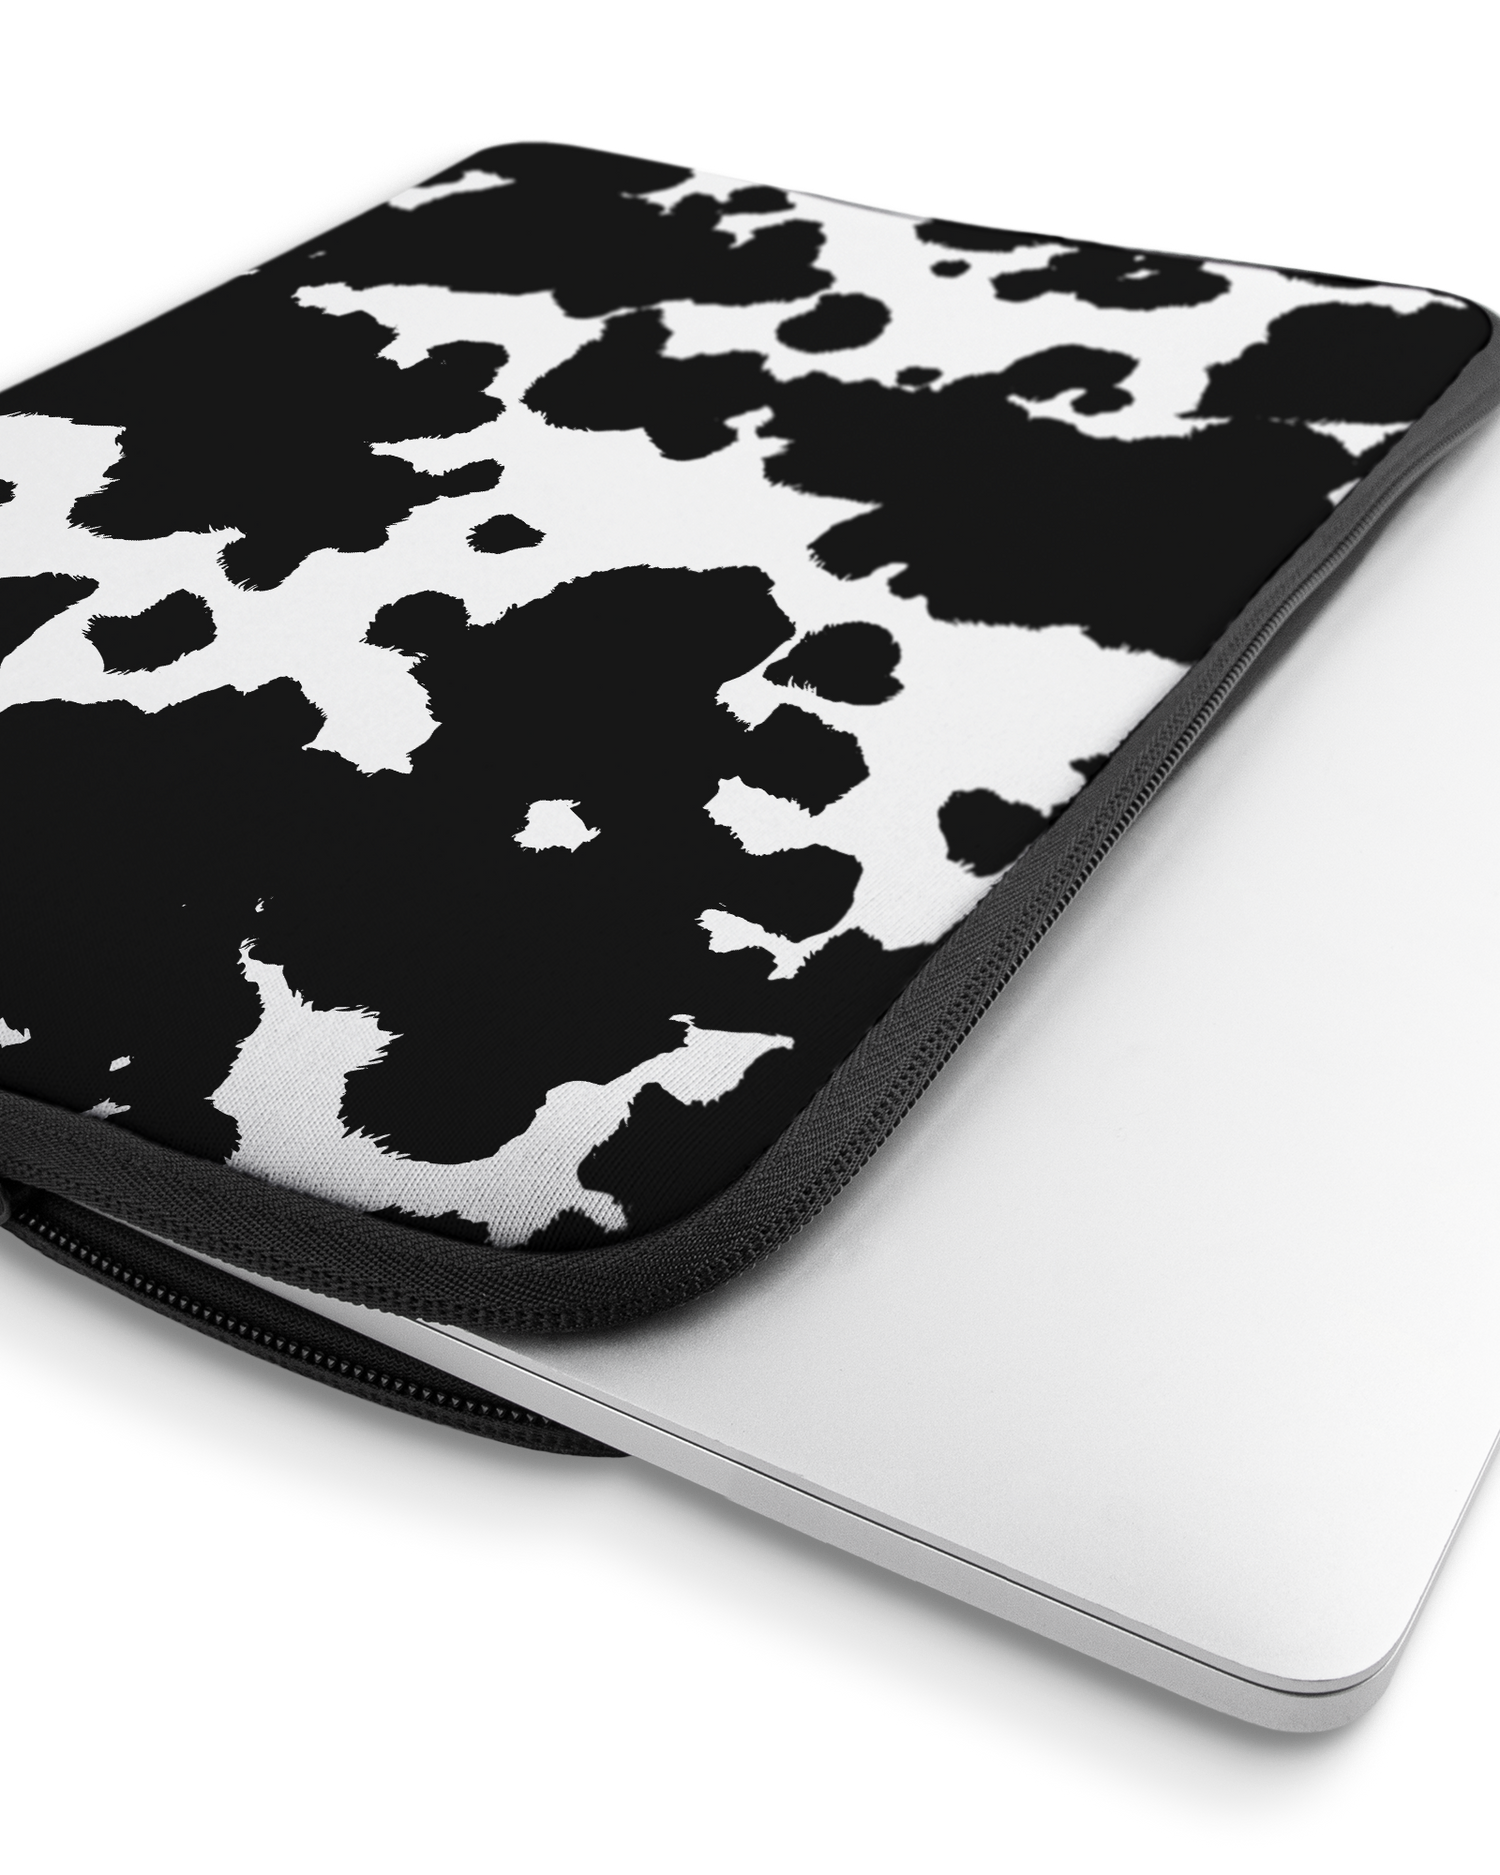 Cow Print Laptop Case 16 inch with device inside